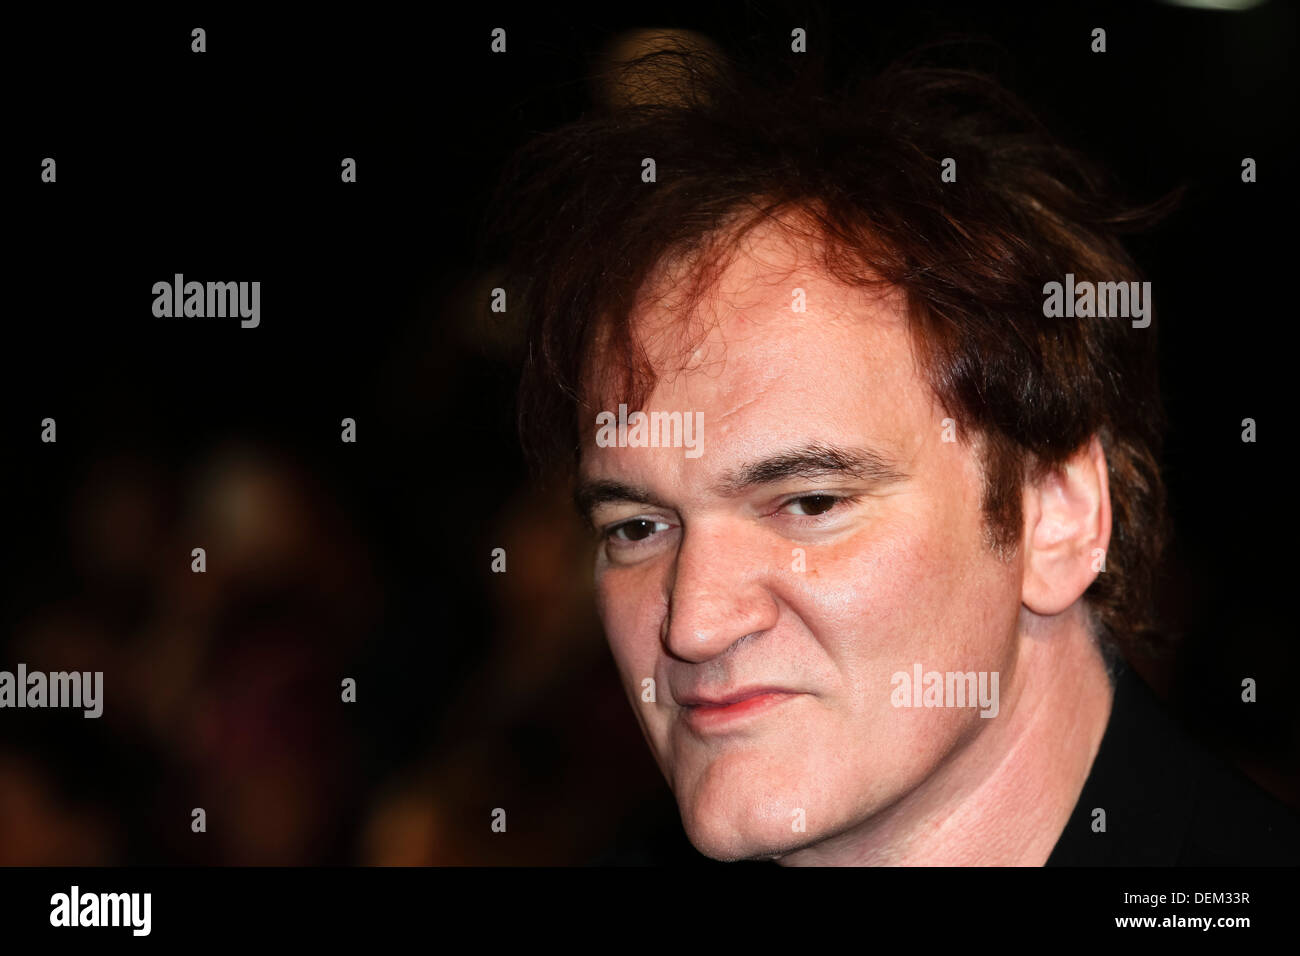 Quentin Tarantino an der UK-Premiere von "Django Unchained" an Empire Leicester Square am 10. Januar 2013 in London, England Stockfoto